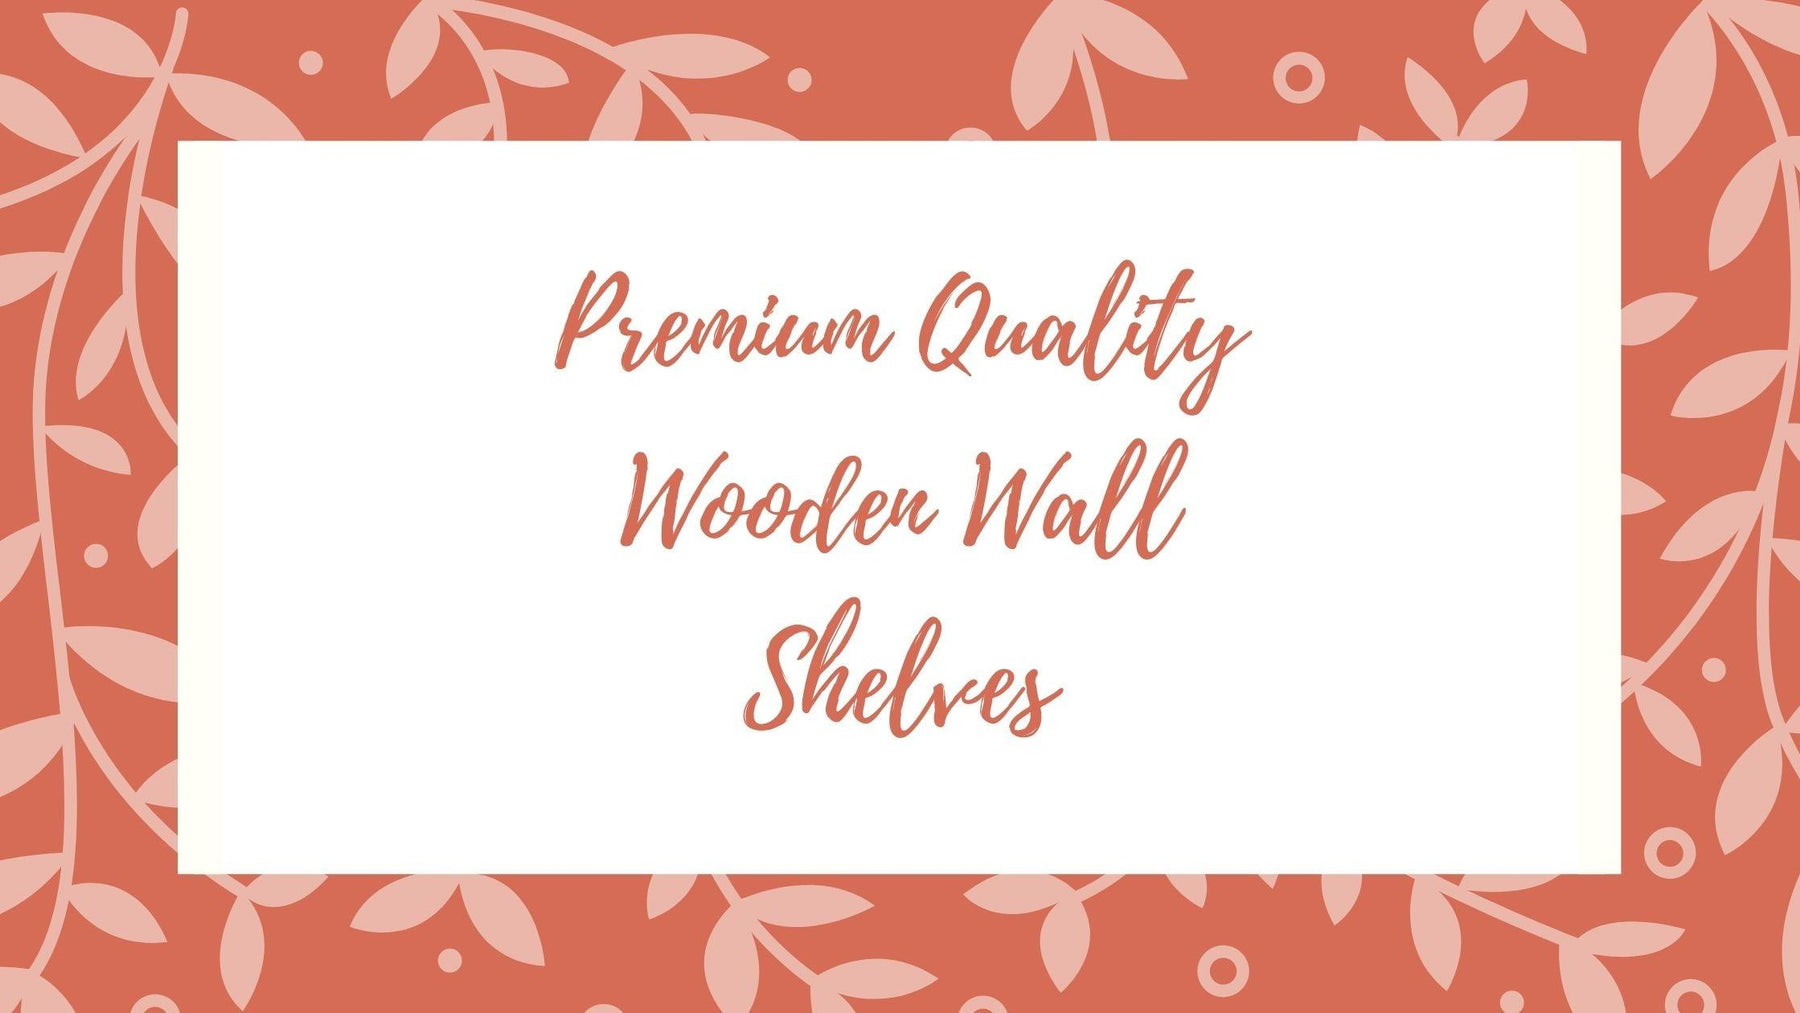 Premium Quality Wooden Wall Shelves - WoodenTwist